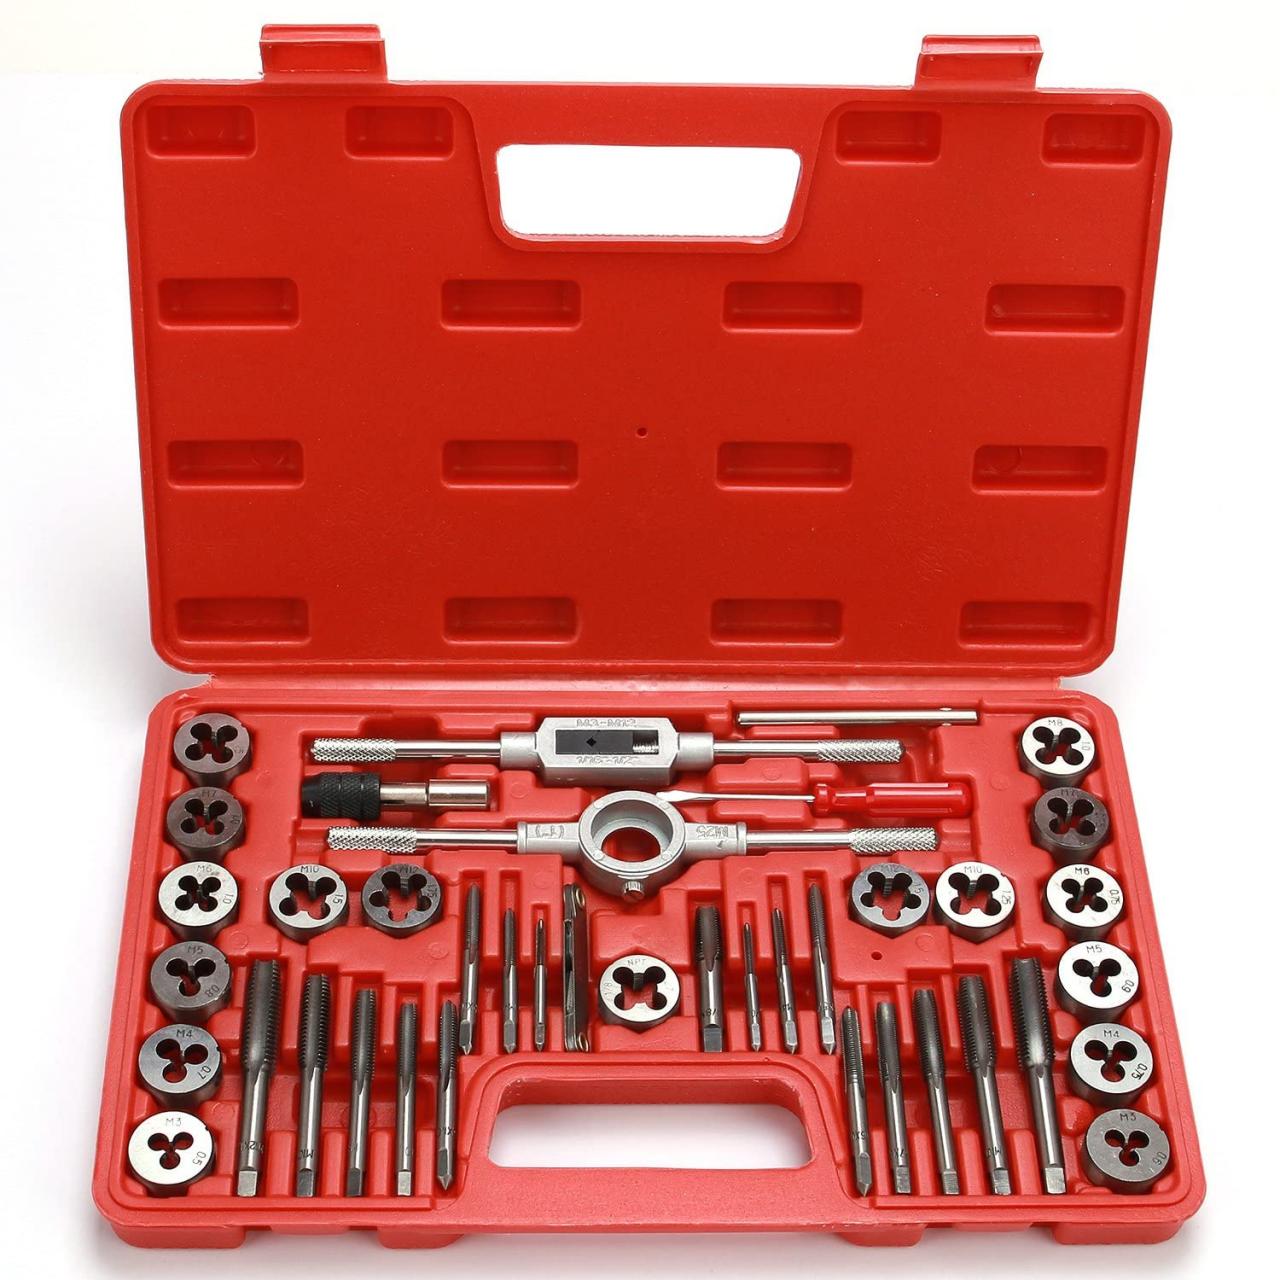 Buy 40-Piece Premium Tap and Die Set - Metric Size M3, M4, M5, M6, M7, M8,  M10, M12, Both Coarse and Fine Teeth | Essential Threading Tool Kit with  Complete Handles, Accessories